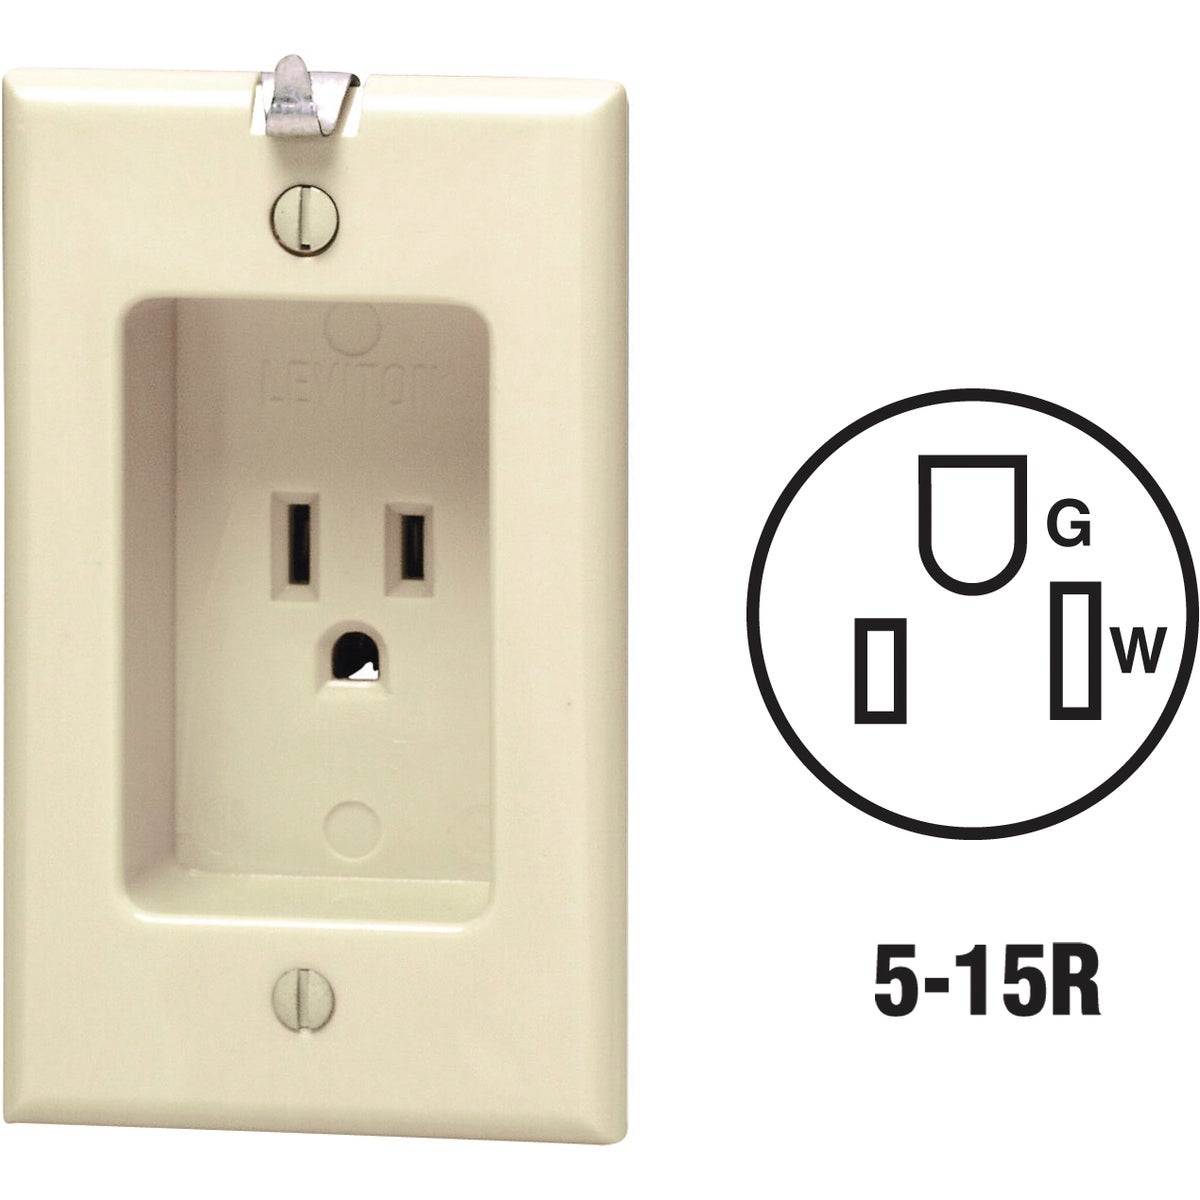 Item 519656, Single outlet with recessed plate and heavy-duty hook for holding a large 